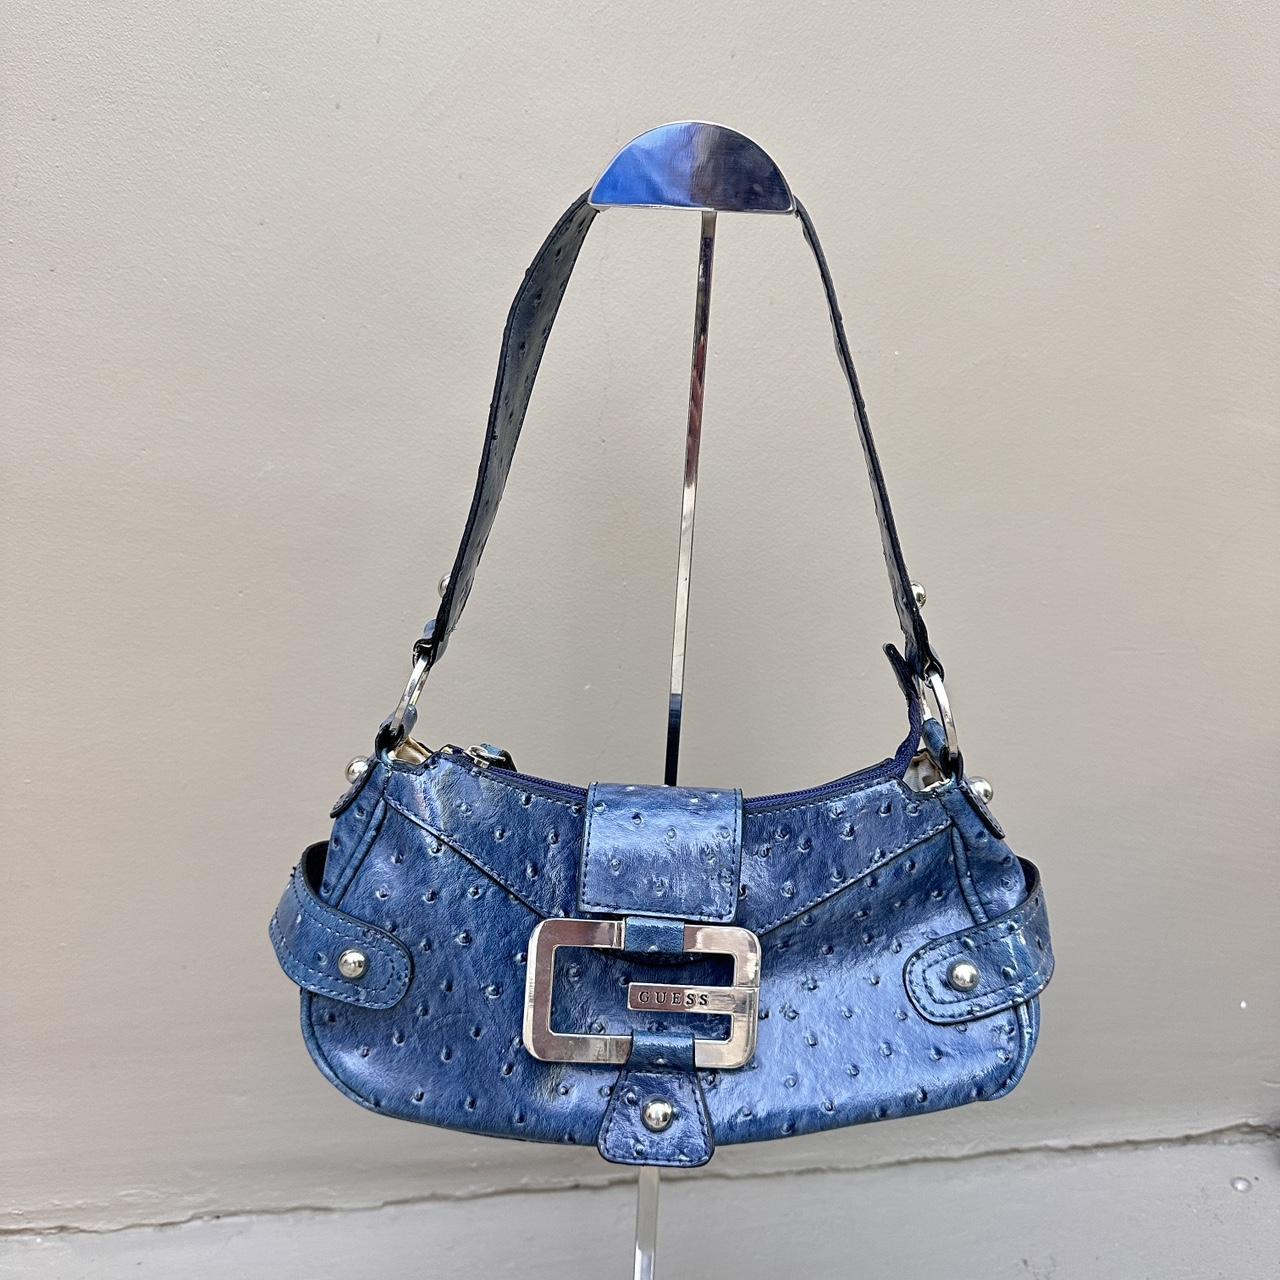 Rare baby blue ostrich guess purse In perfect... - Depop